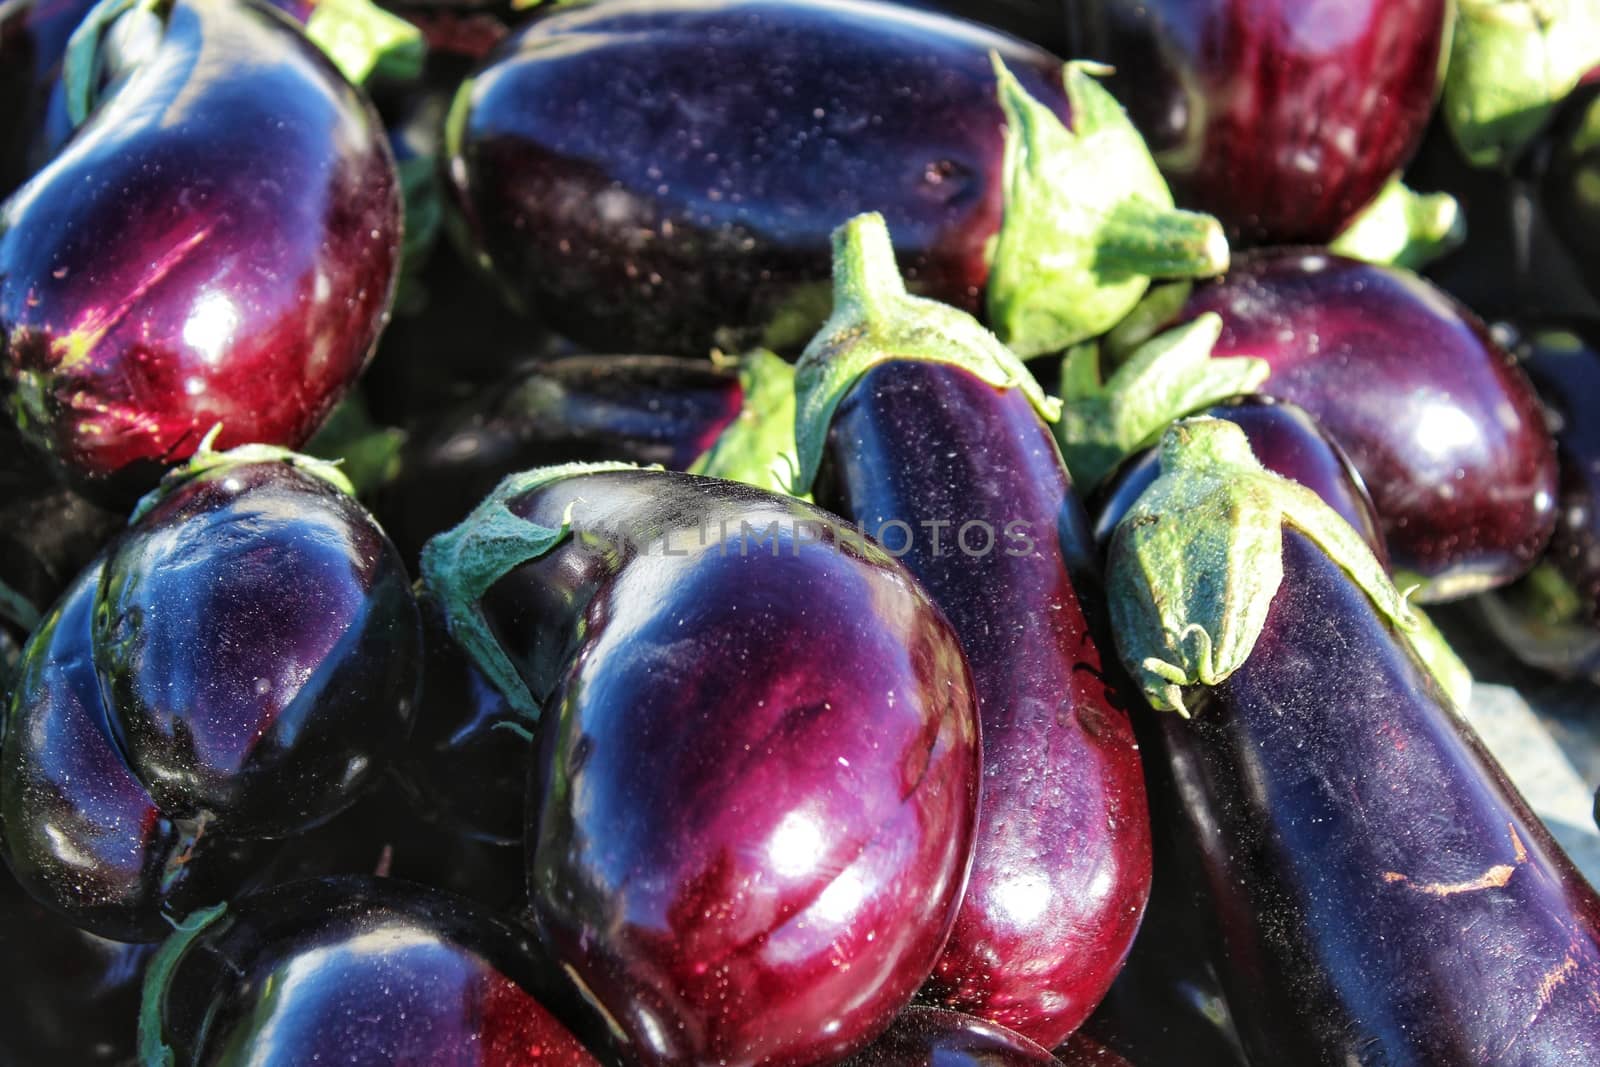 Aubergine for sale at a market stall  by soniabonet